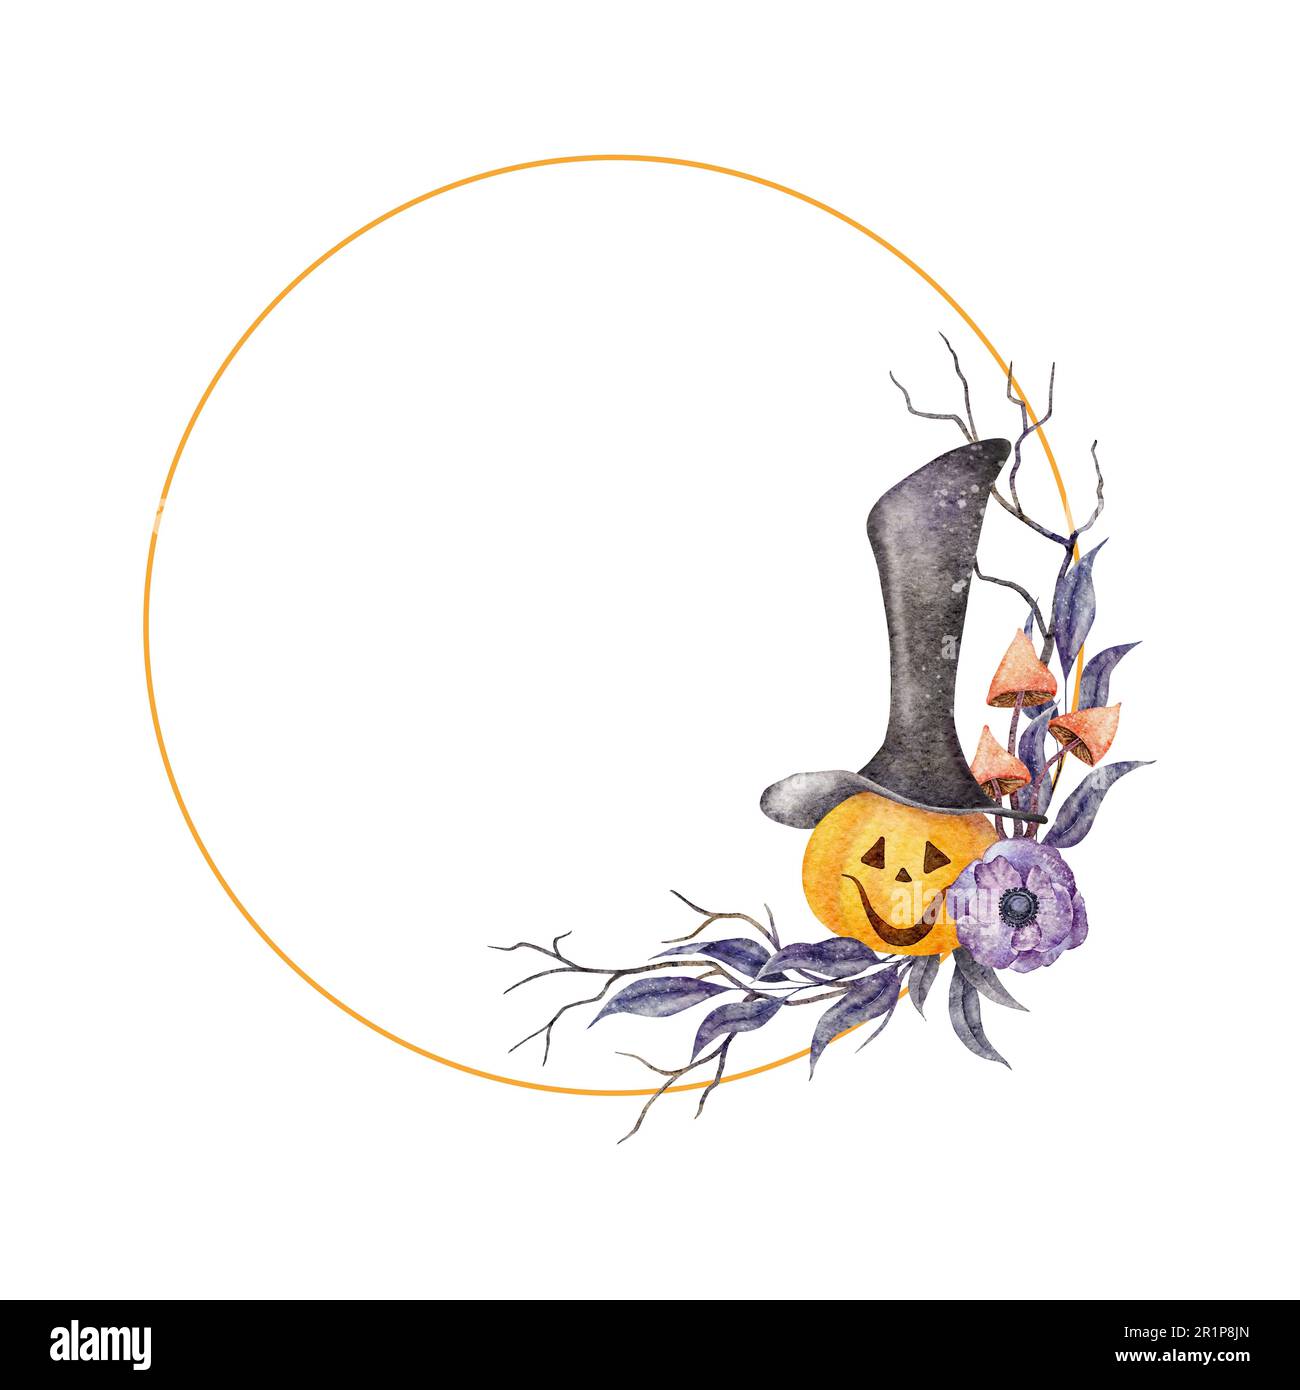 Scary Jack o Lantern halloween pumpkin face in long hat. Wreath with branches with leaves, twigs, anemone and mushroom, Halloween holiday. Watercolor Stock Photo